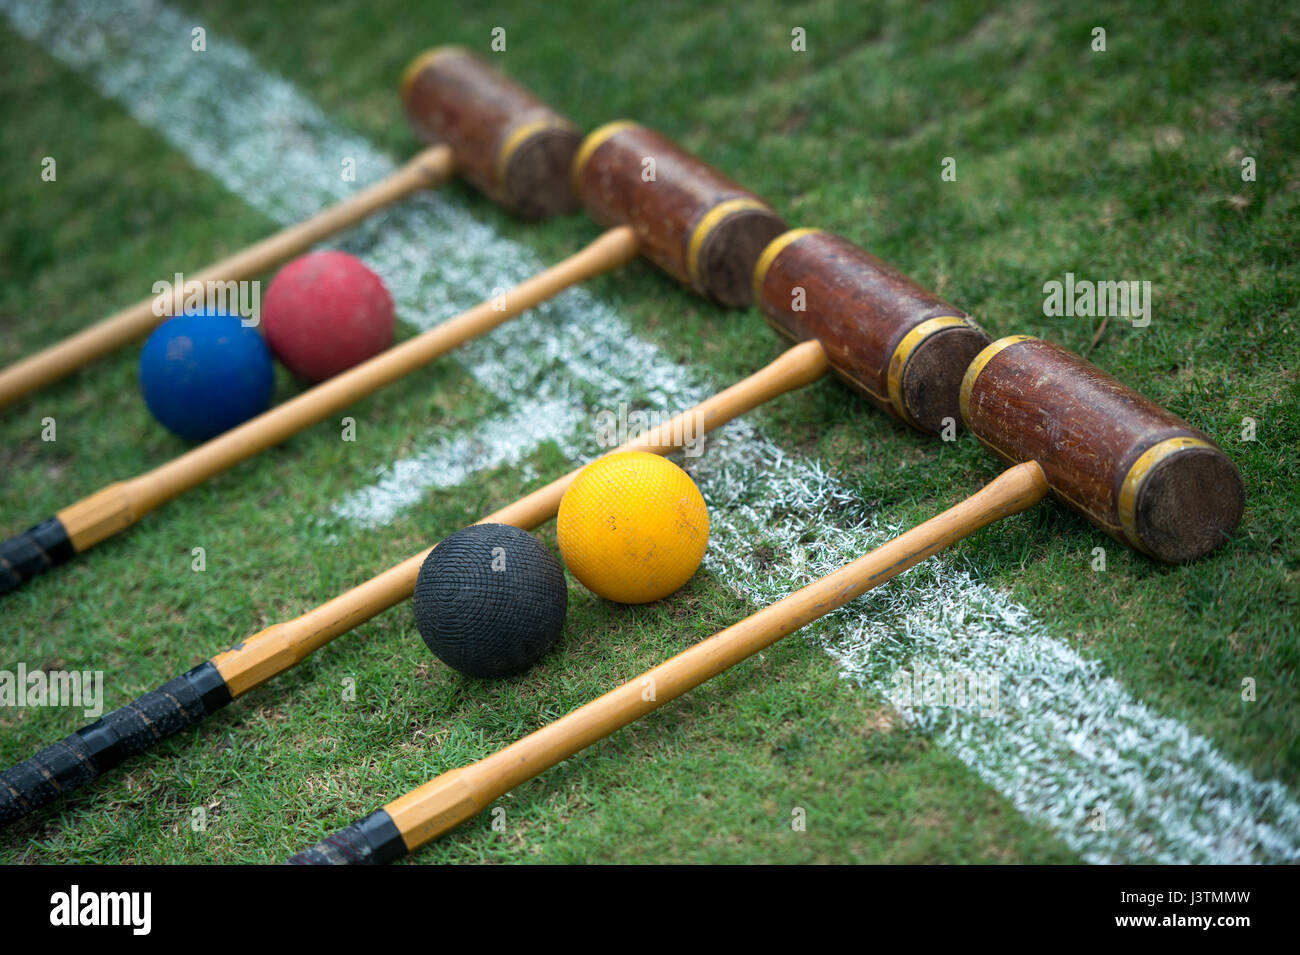 Croquet set laid out ready to play, croquet mallets and balls.Jayne Russell / Alamy Stock Photo Stock Photo